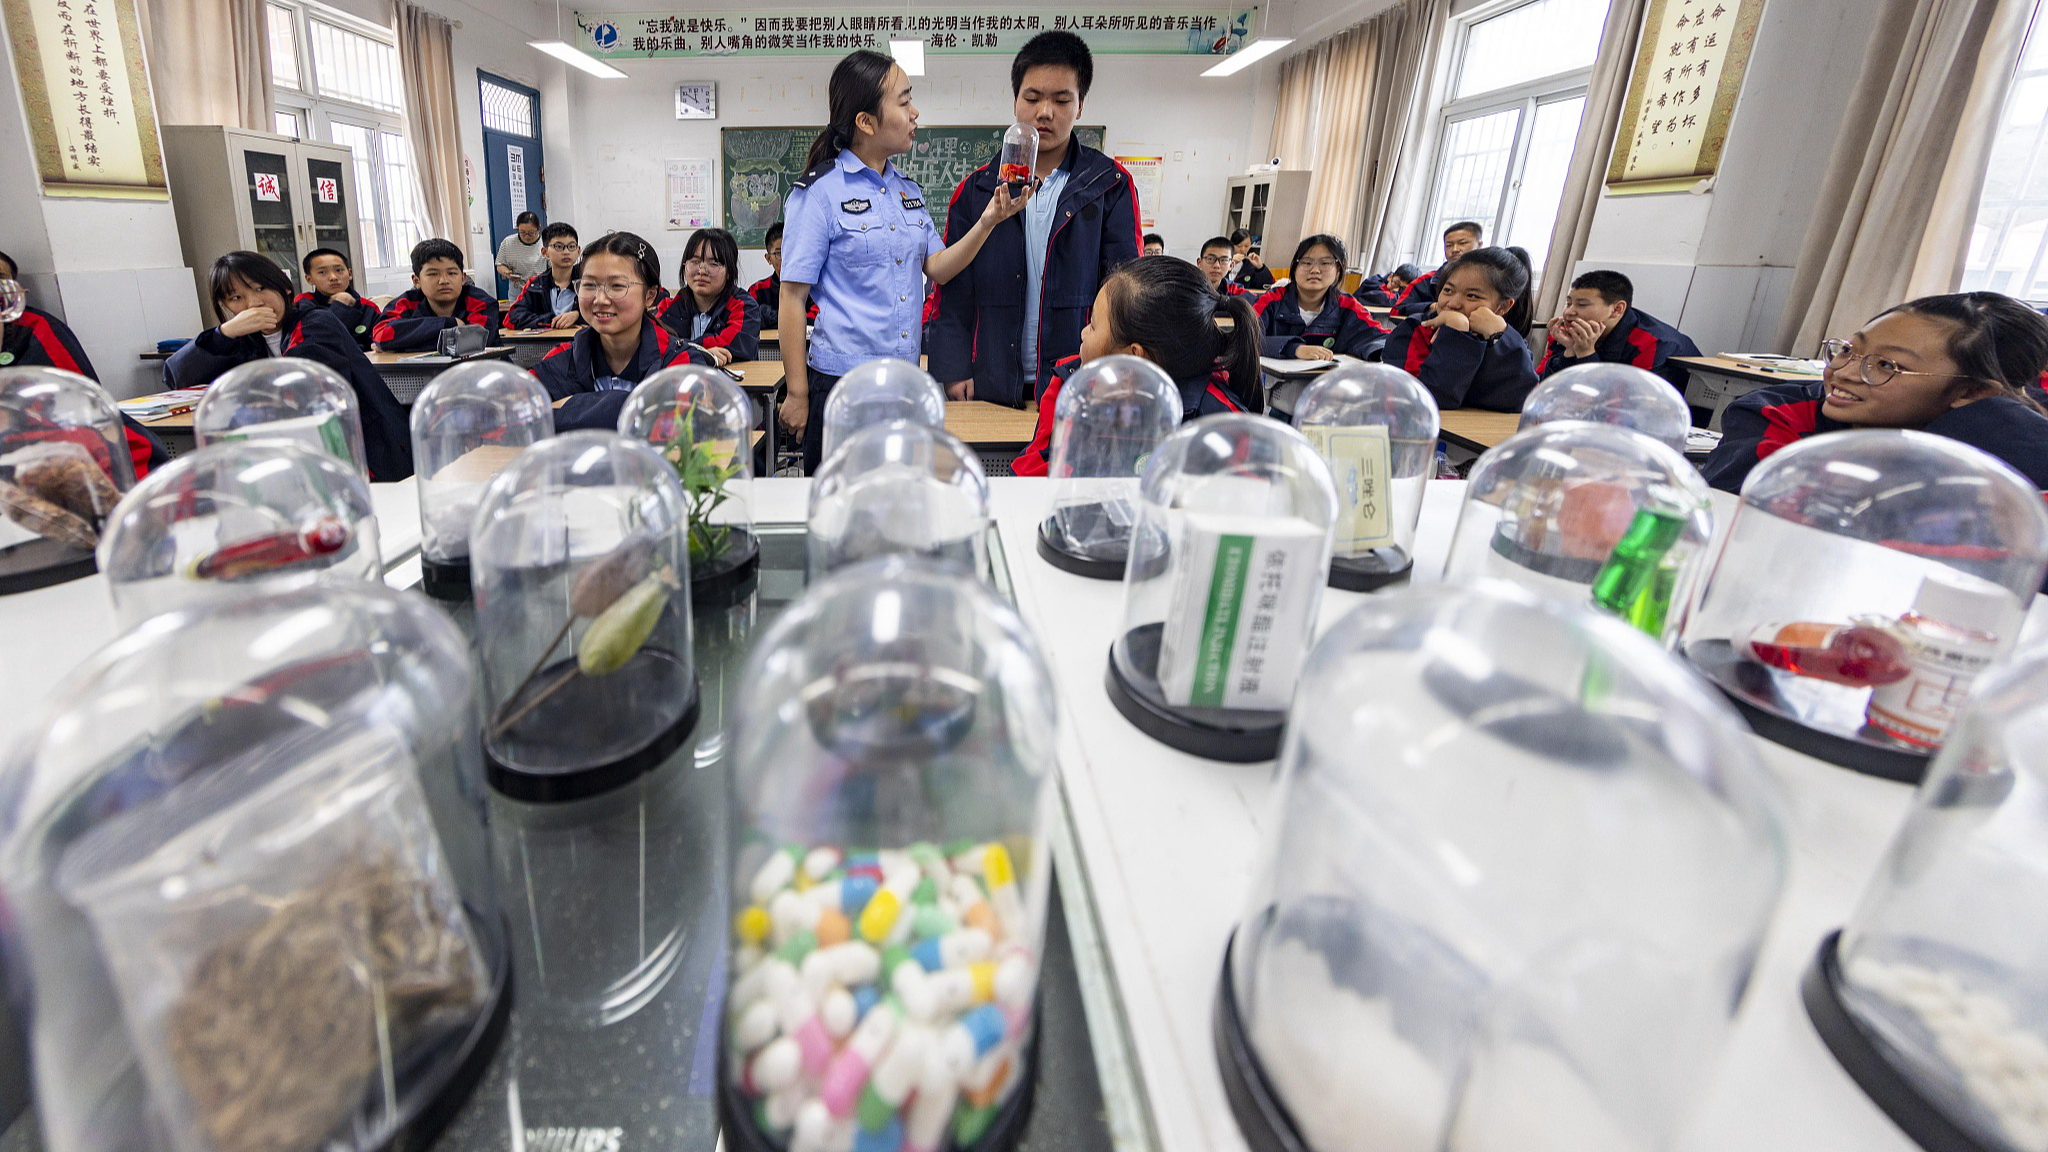 Police explain drug control process to students at a middle school in Taizhou City, east China's Jiangsu Province, June 26, 2024. /CFP